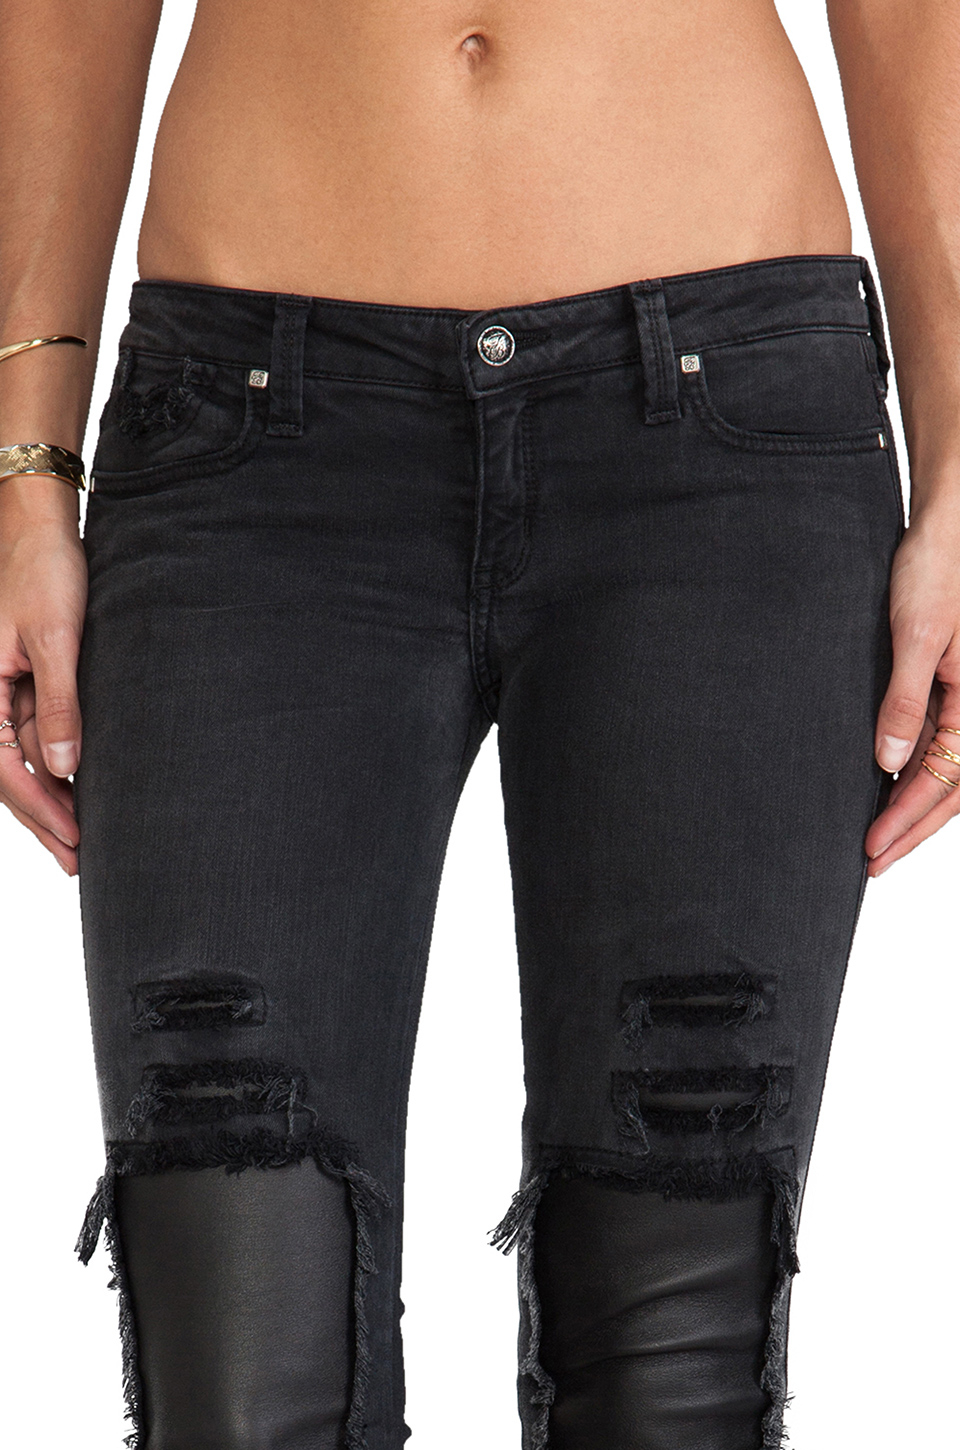 womens jeans with leather patches